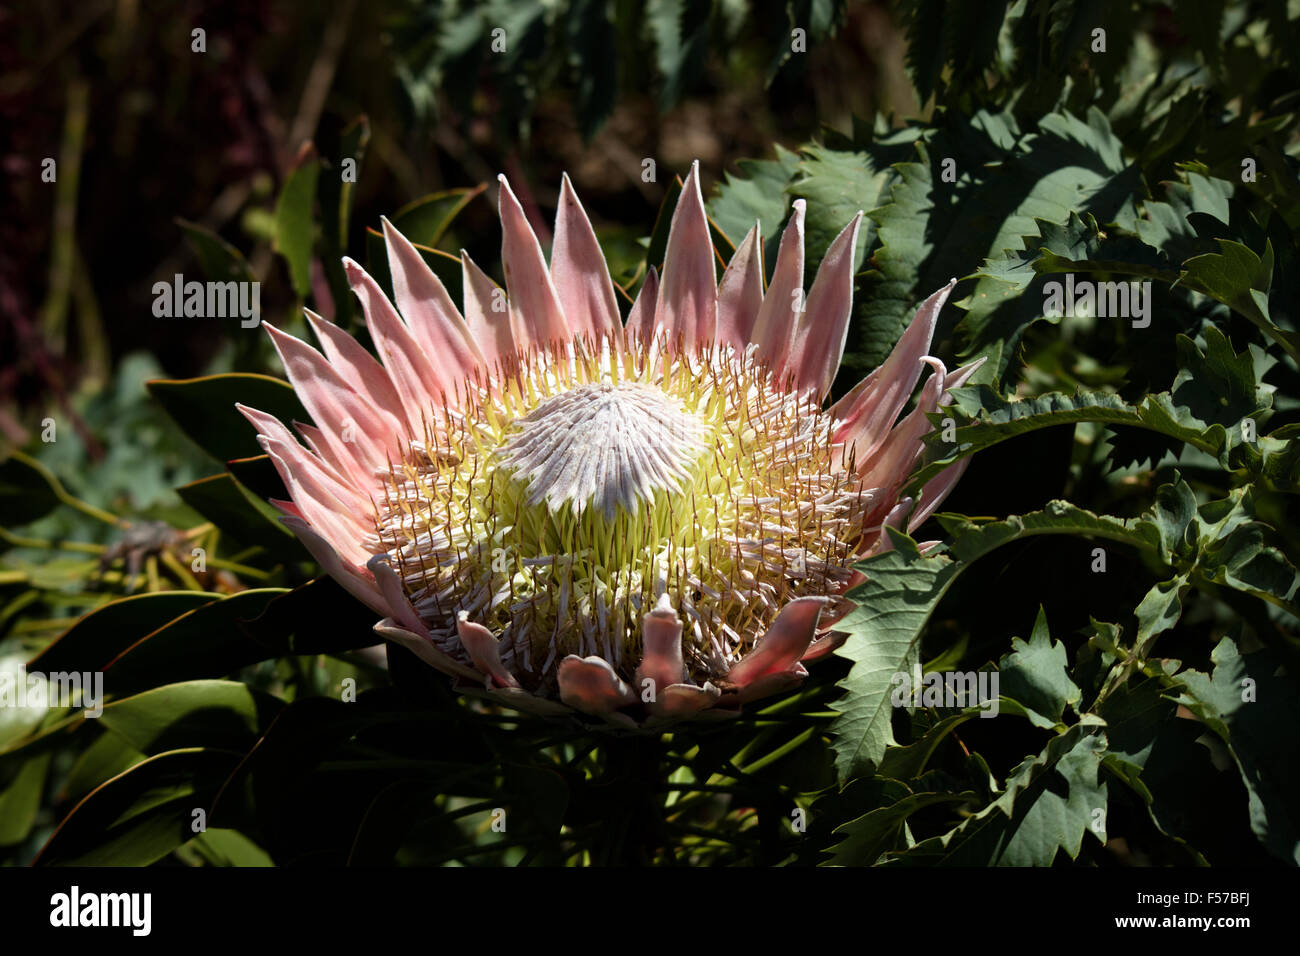 King protea the national flower of South Africa Stock Photo